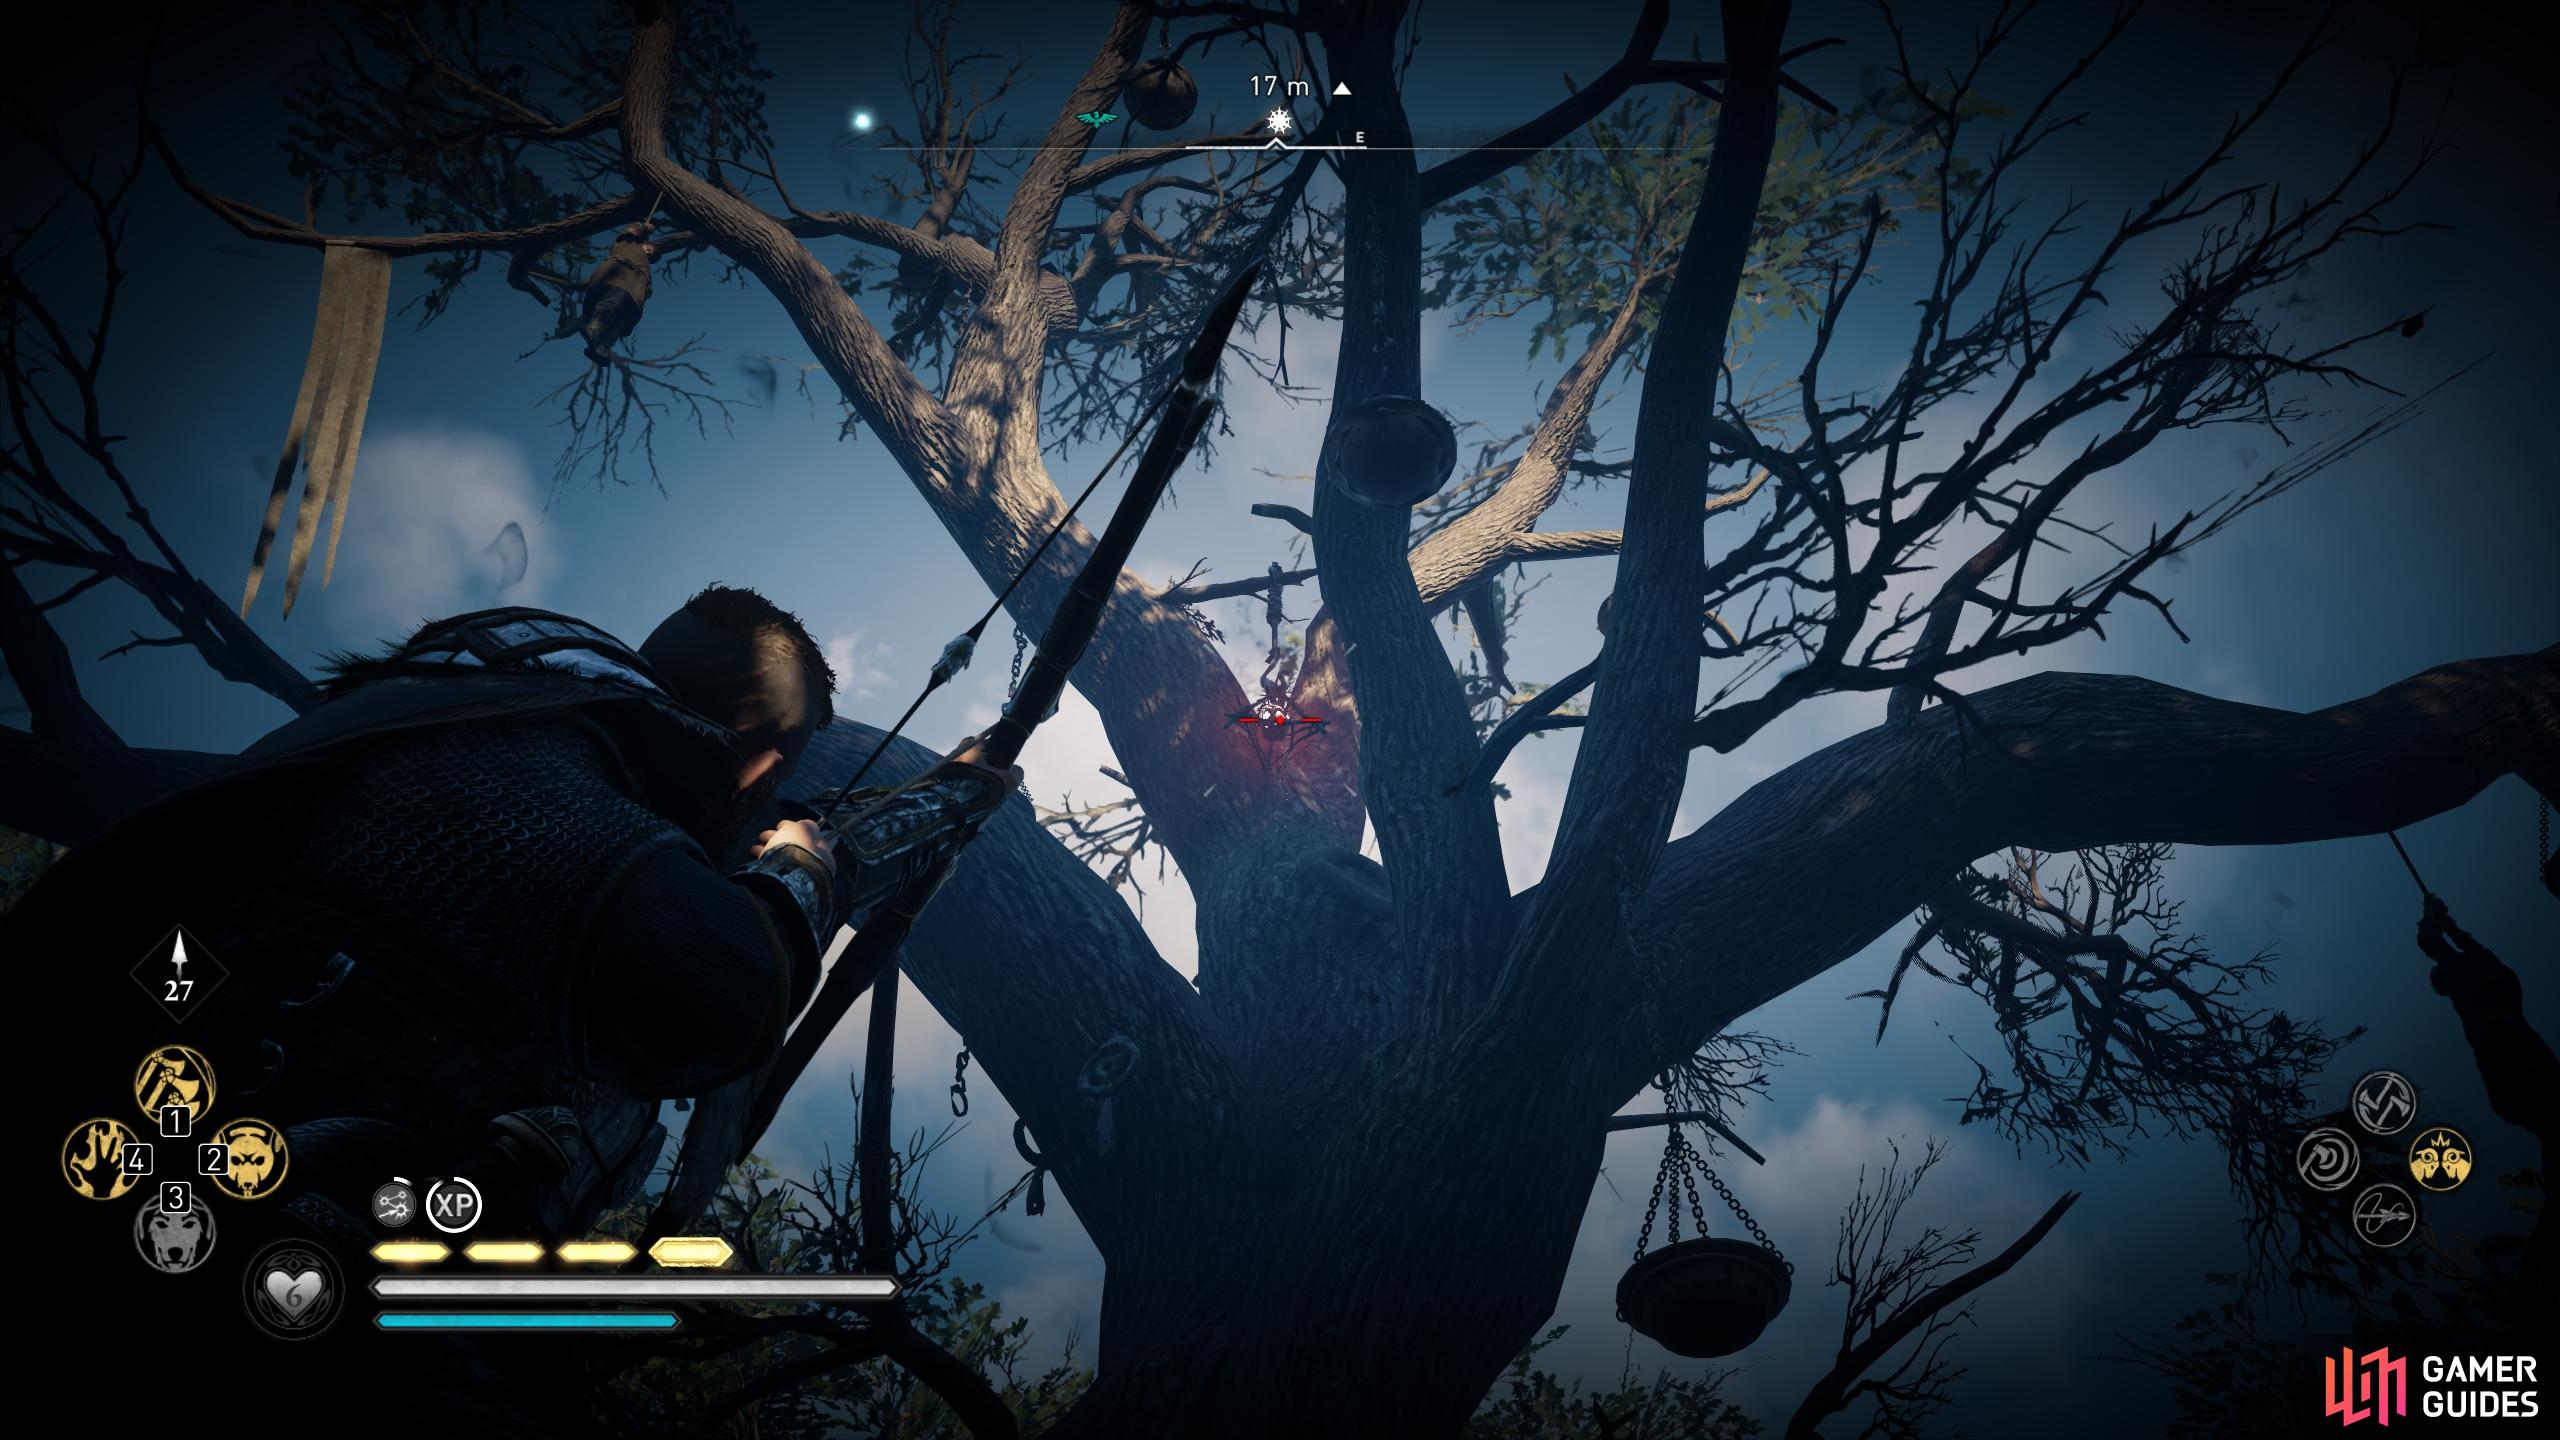 You can shoot the cursed symbol in the tree to destroy it.